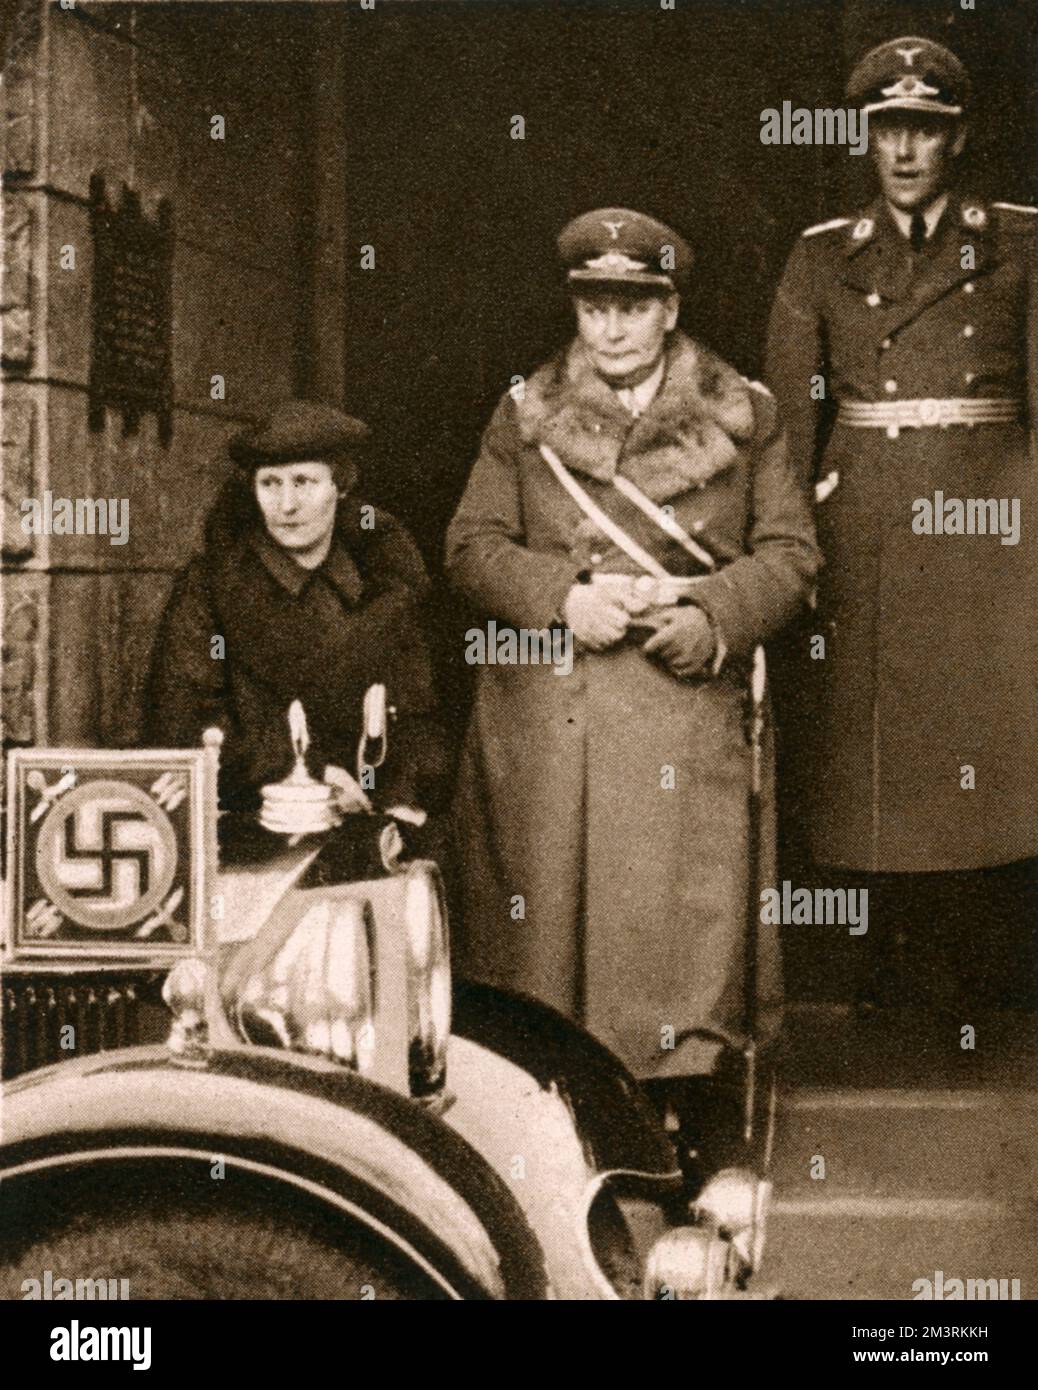 General Hermann Goering pictured leaving St. George's Church, the British church in Berlin, where he had attended a service of mourning for the late King George V.  Accompanying him is his wife, Emmy.     Date: 1936 Stock Photo